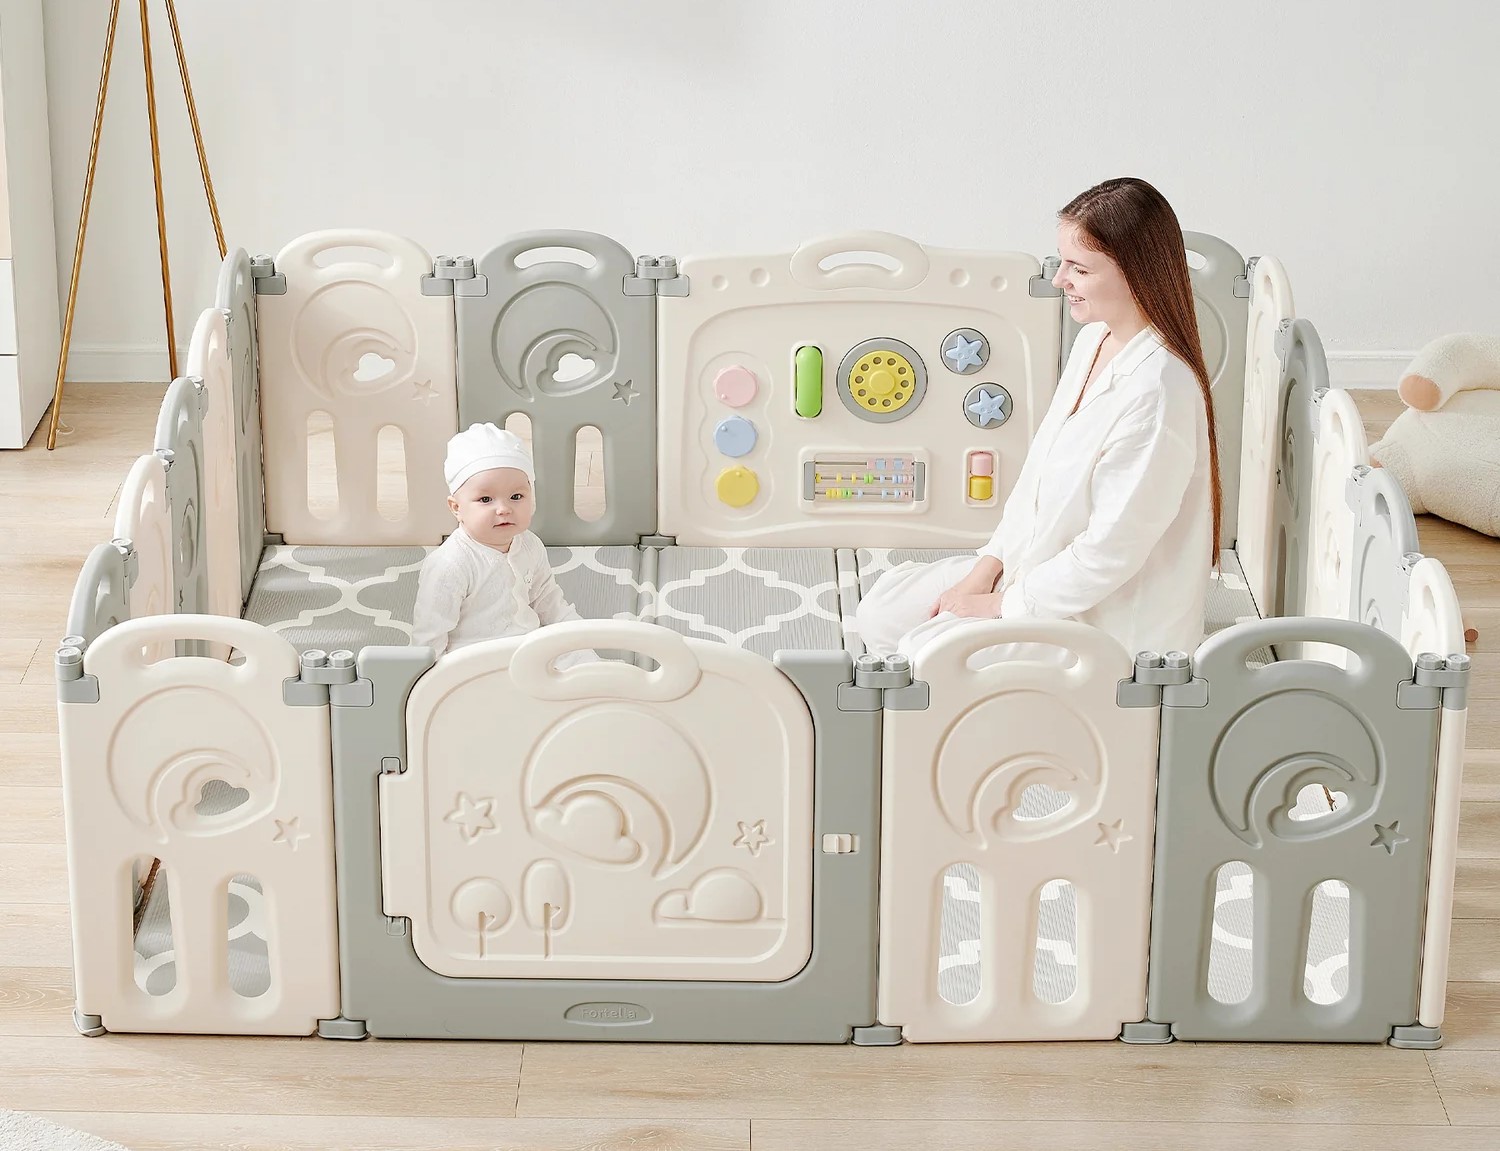 Baby Play Yard Review: A Comprehensive Analysis